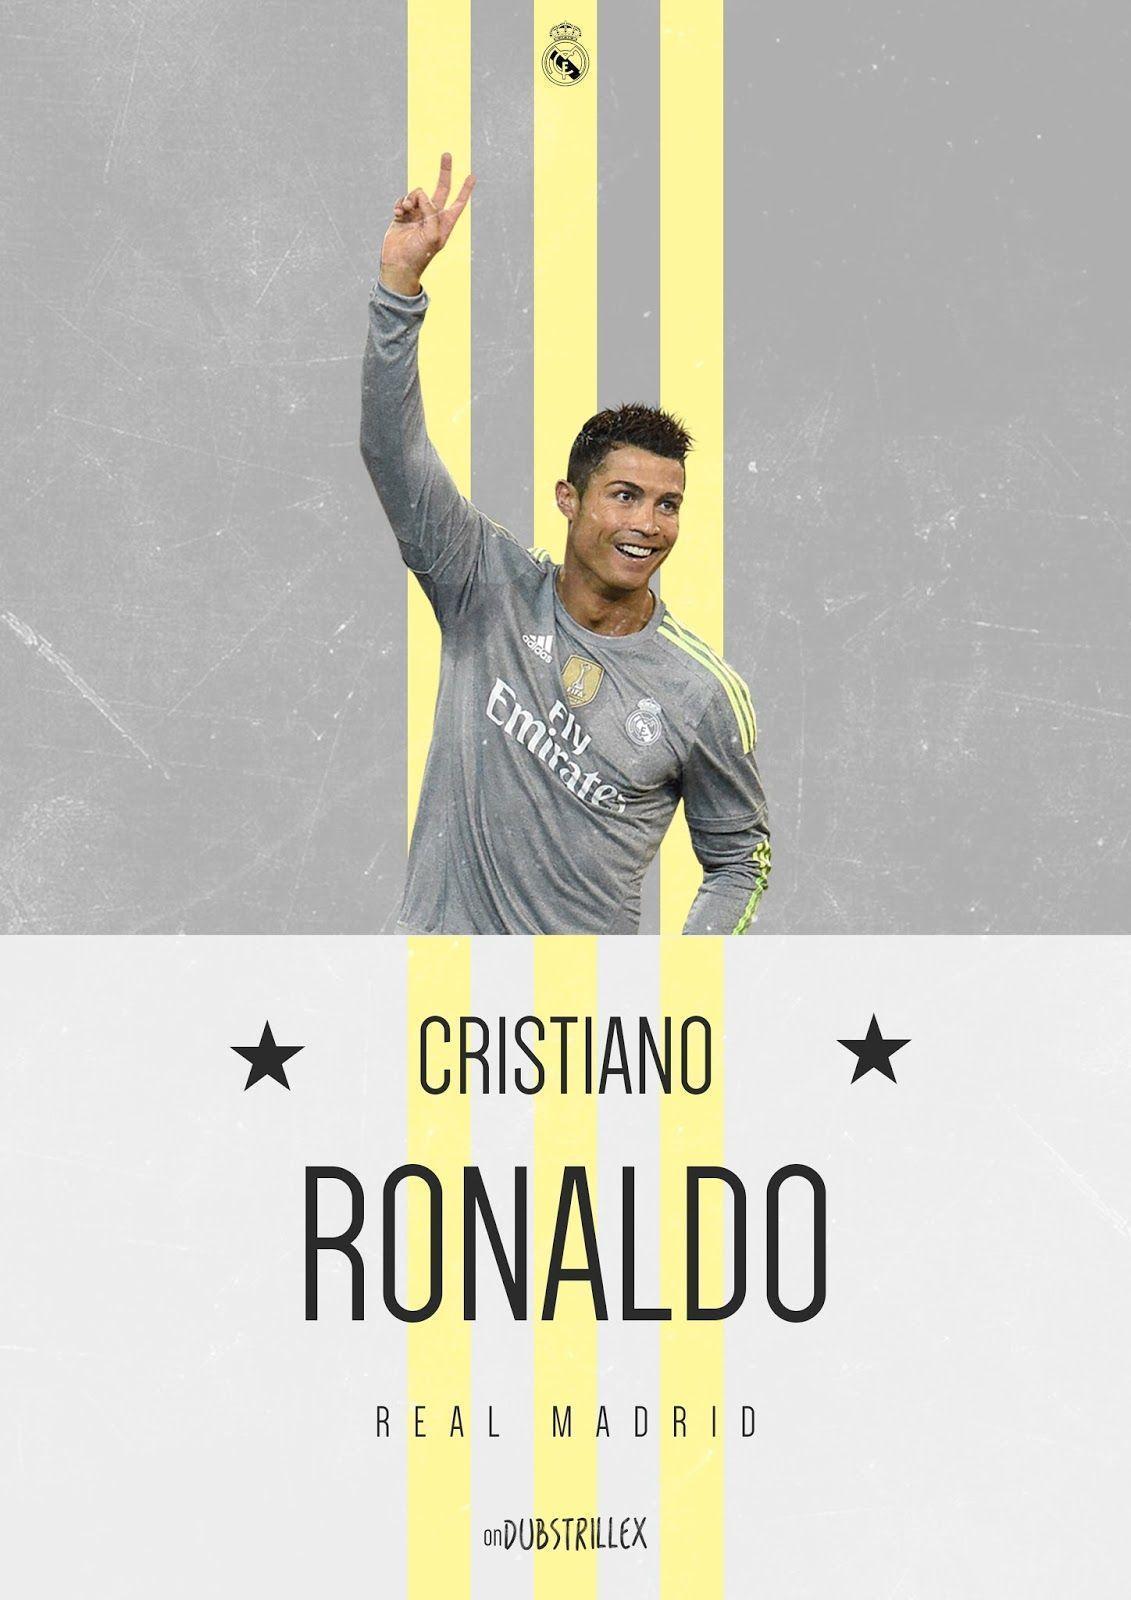 Cristiano Ronaldo Wallpaper for iPhone and Android Full HD